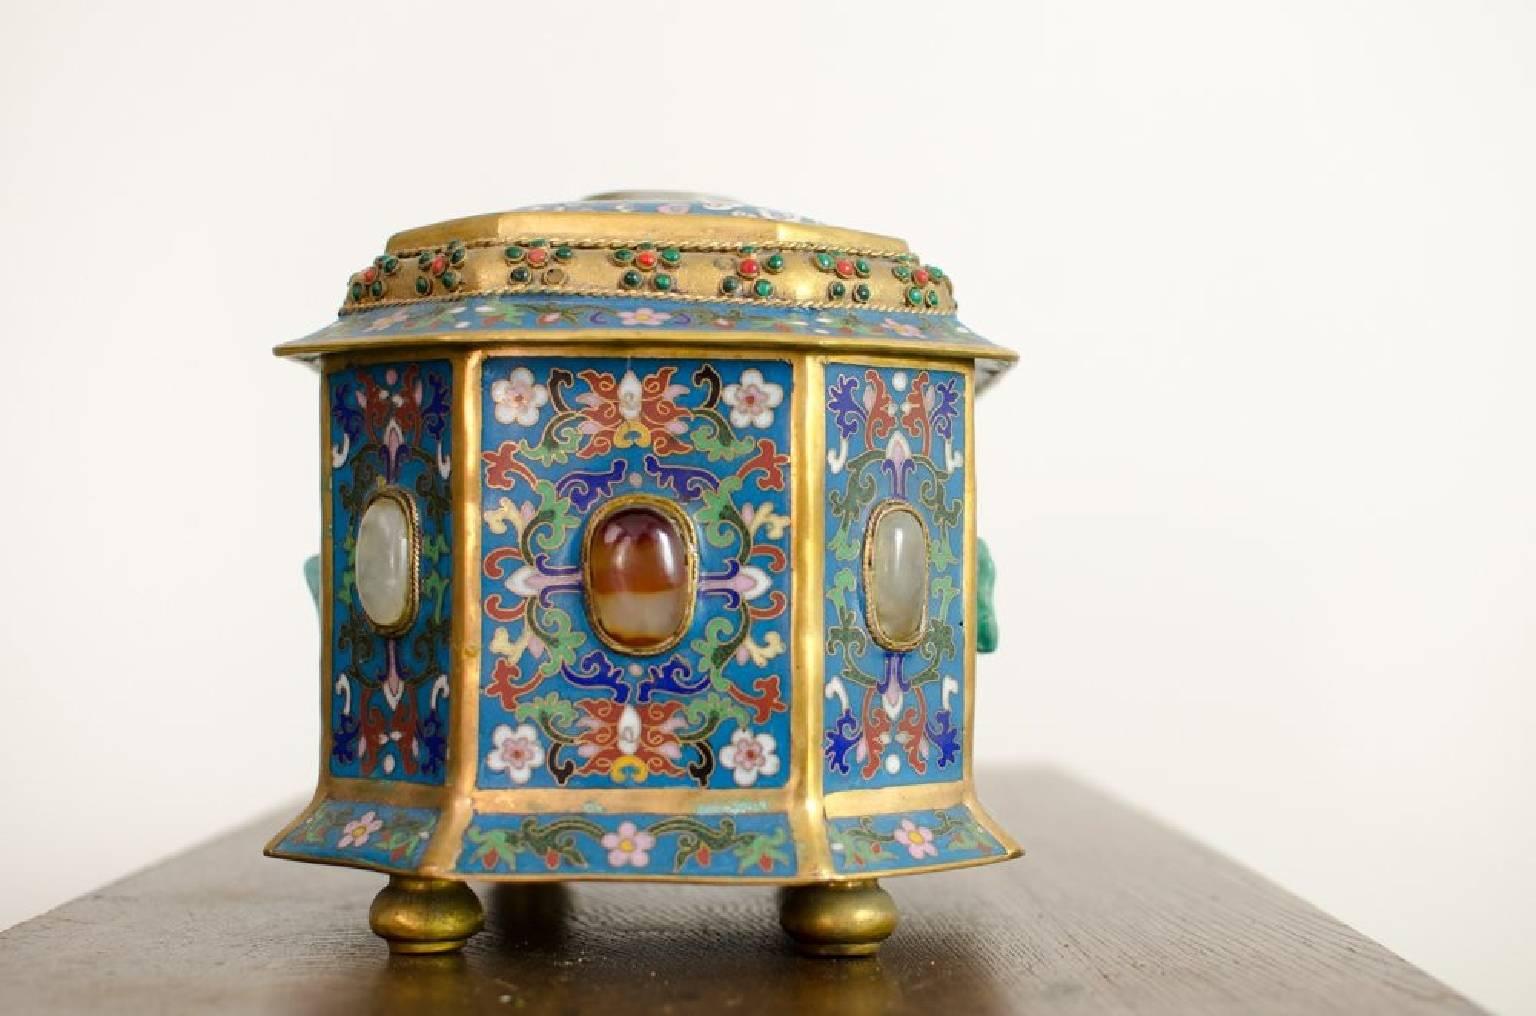 Chinese Hardstone Inlaid Cloisonne Enameled Gilt Metal Casket In Fair Condition For Sale In New York, NY